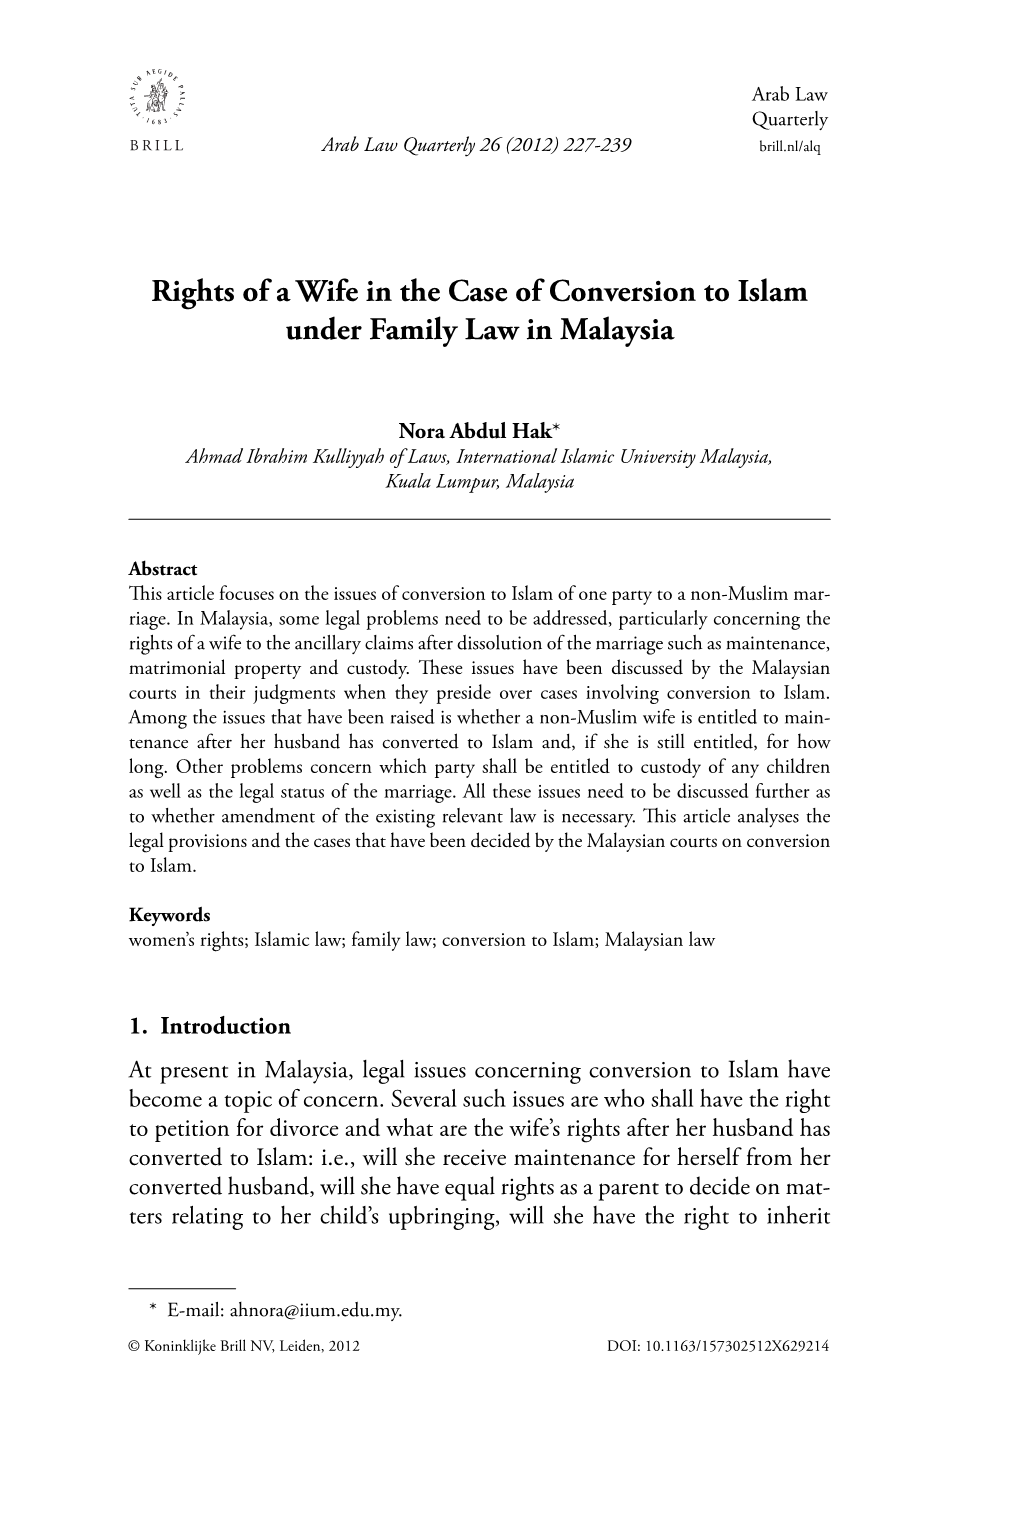 Rights of a Wife in the Case of Conversion to Islam Under Family Law in Malaysia